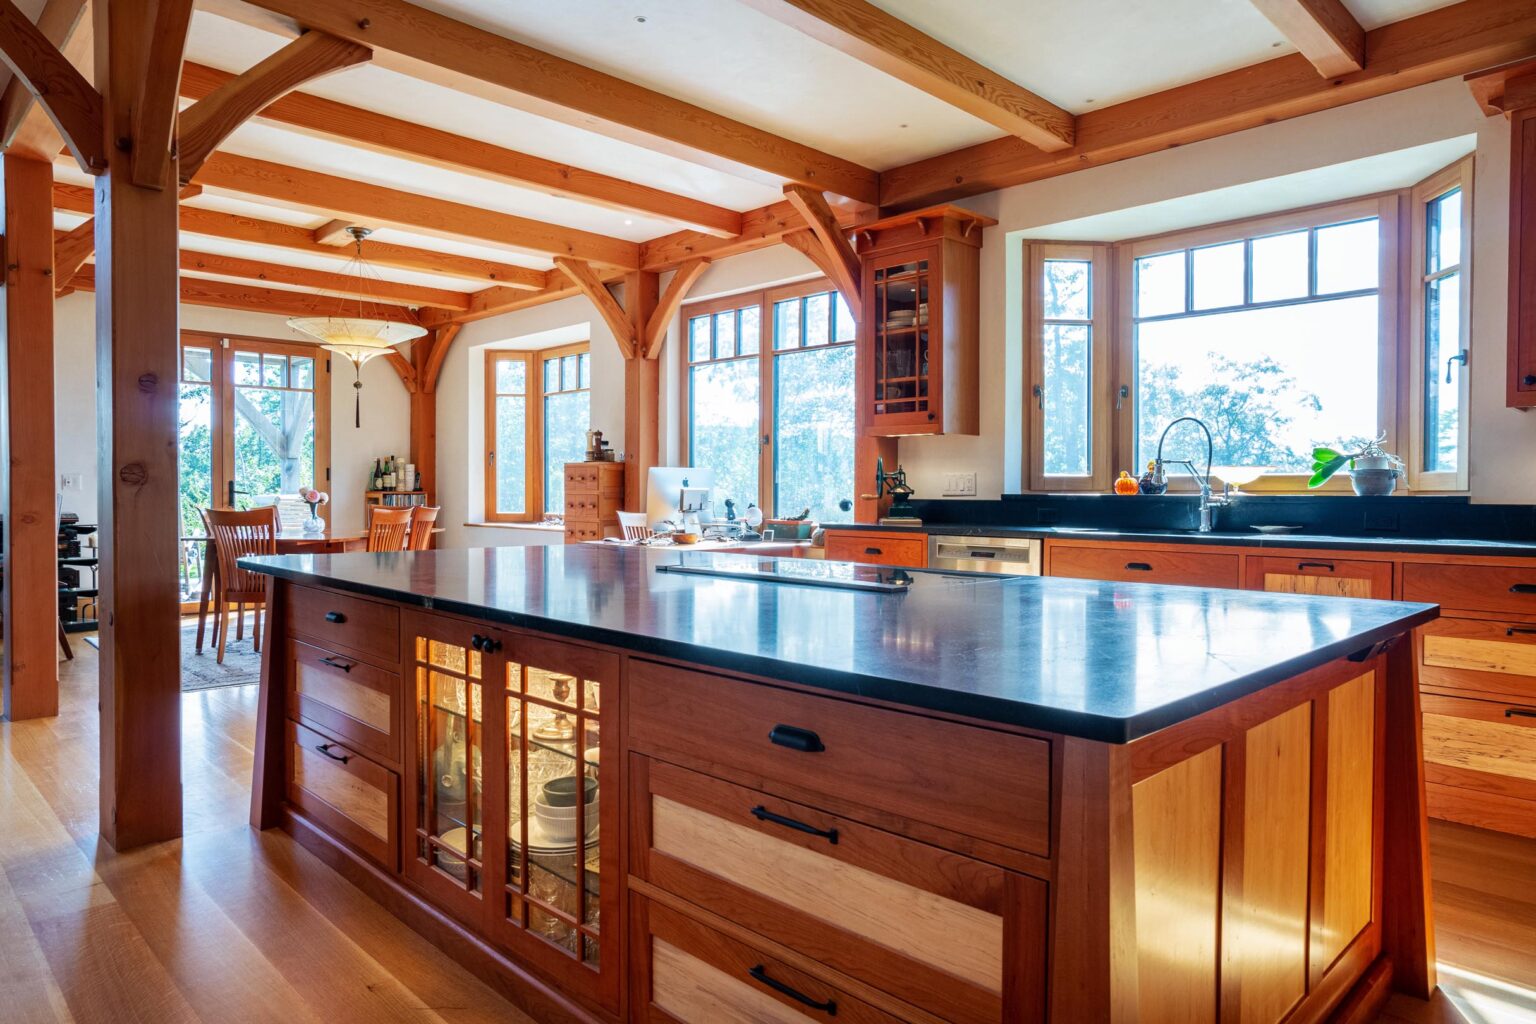 Timber Frame Kitchen by Woodhouse Timber Frame Company